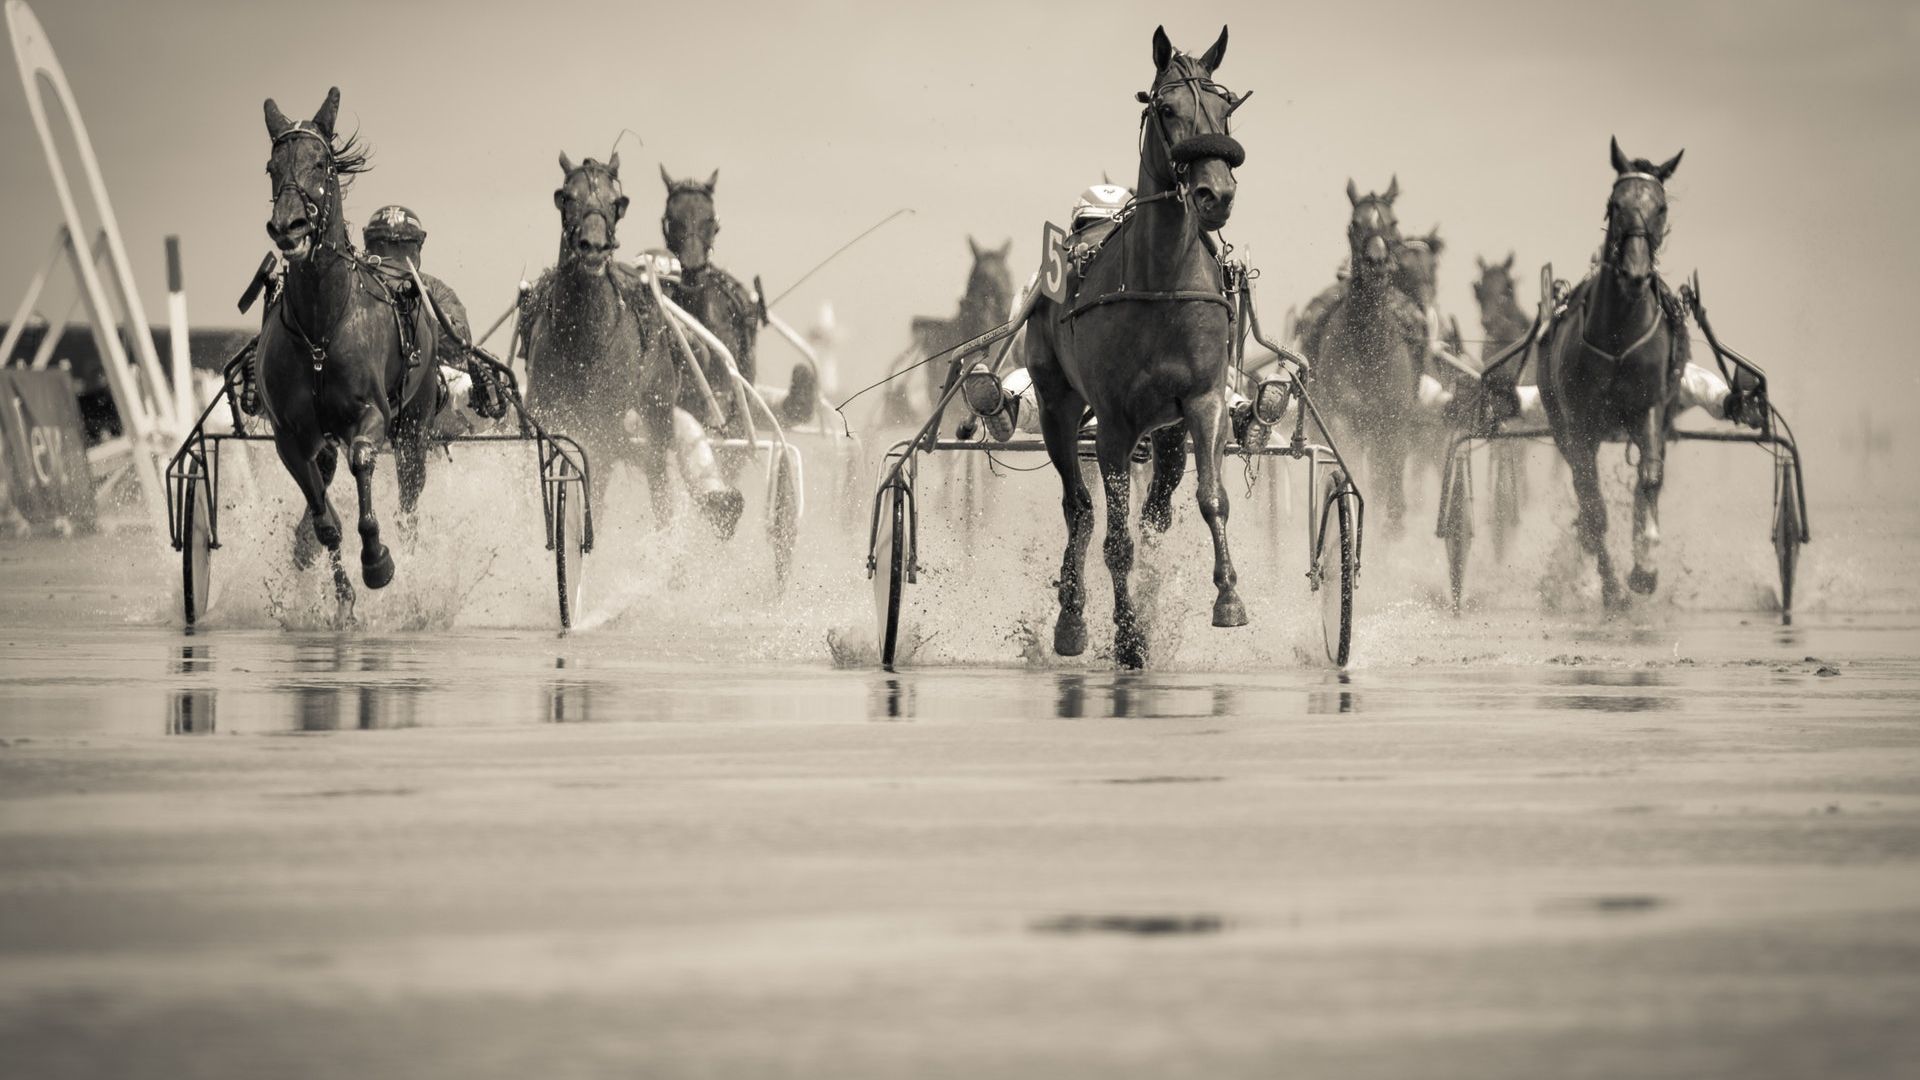 Group Of Horse With Carriage Running On .wallpapertip.com